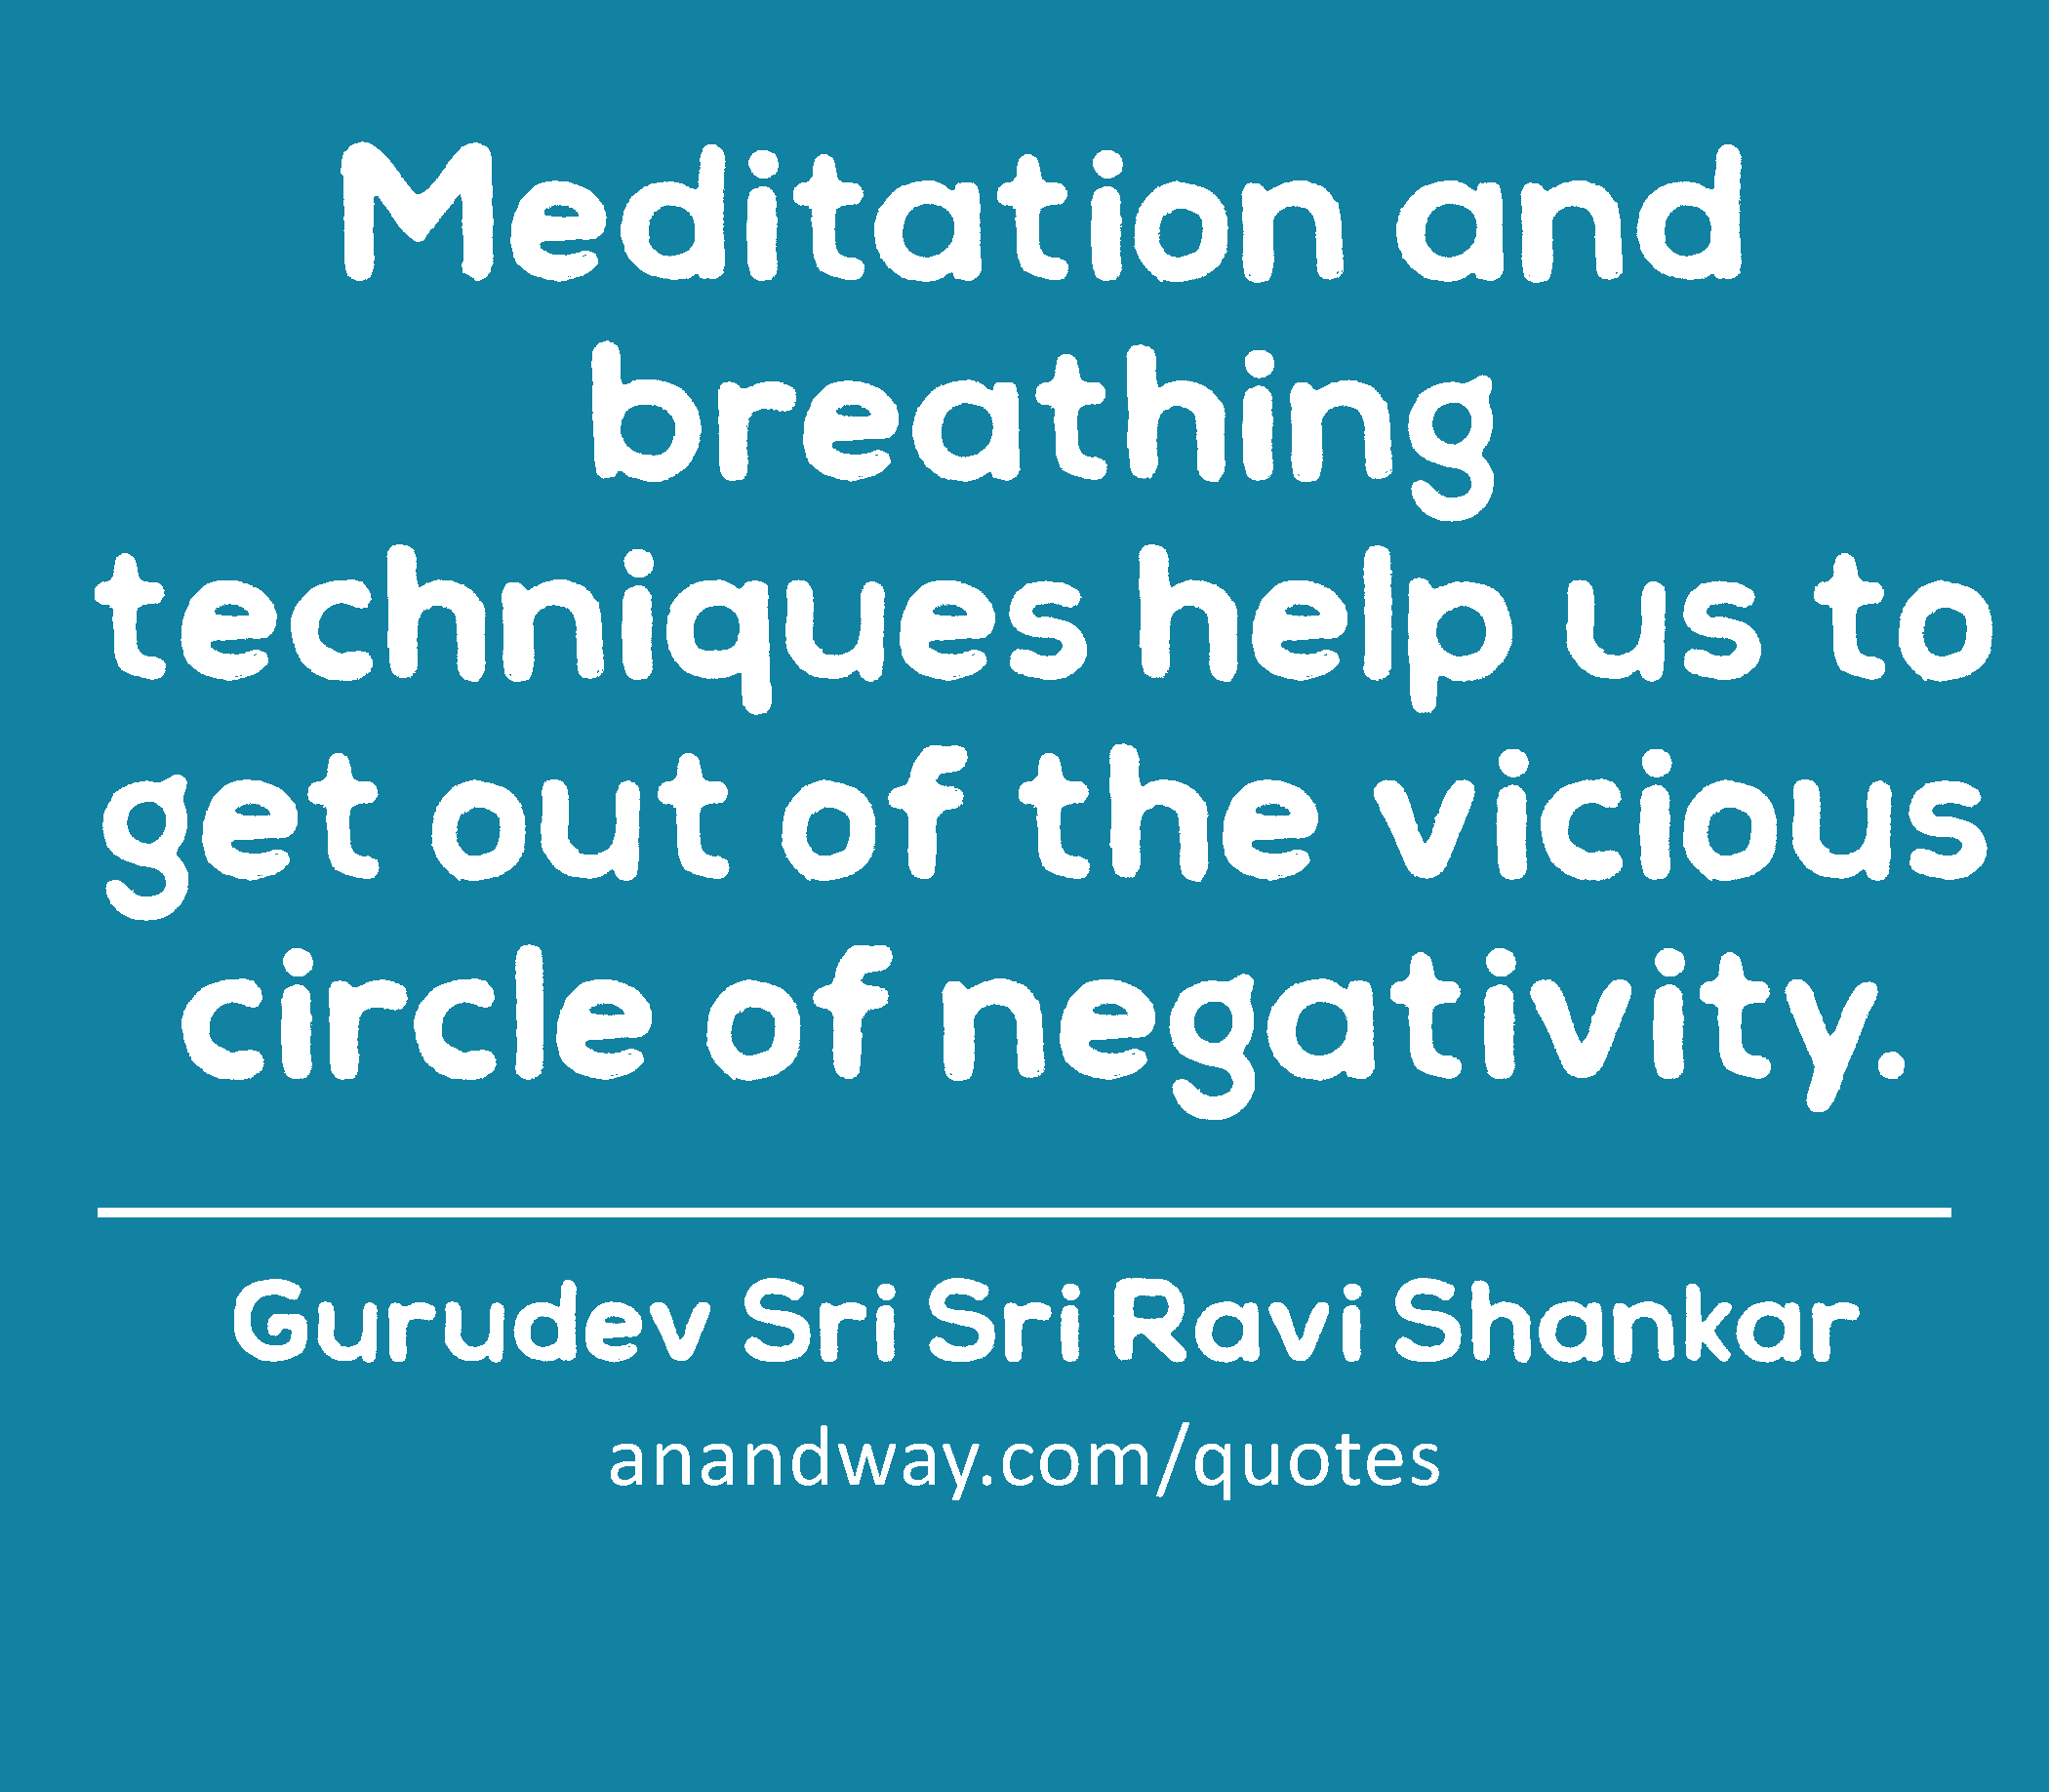 Meditation and breathing techniques help us to get out of the vicious circle of negativity. 
 -Gurudev Sri Sri Ravi Shankar